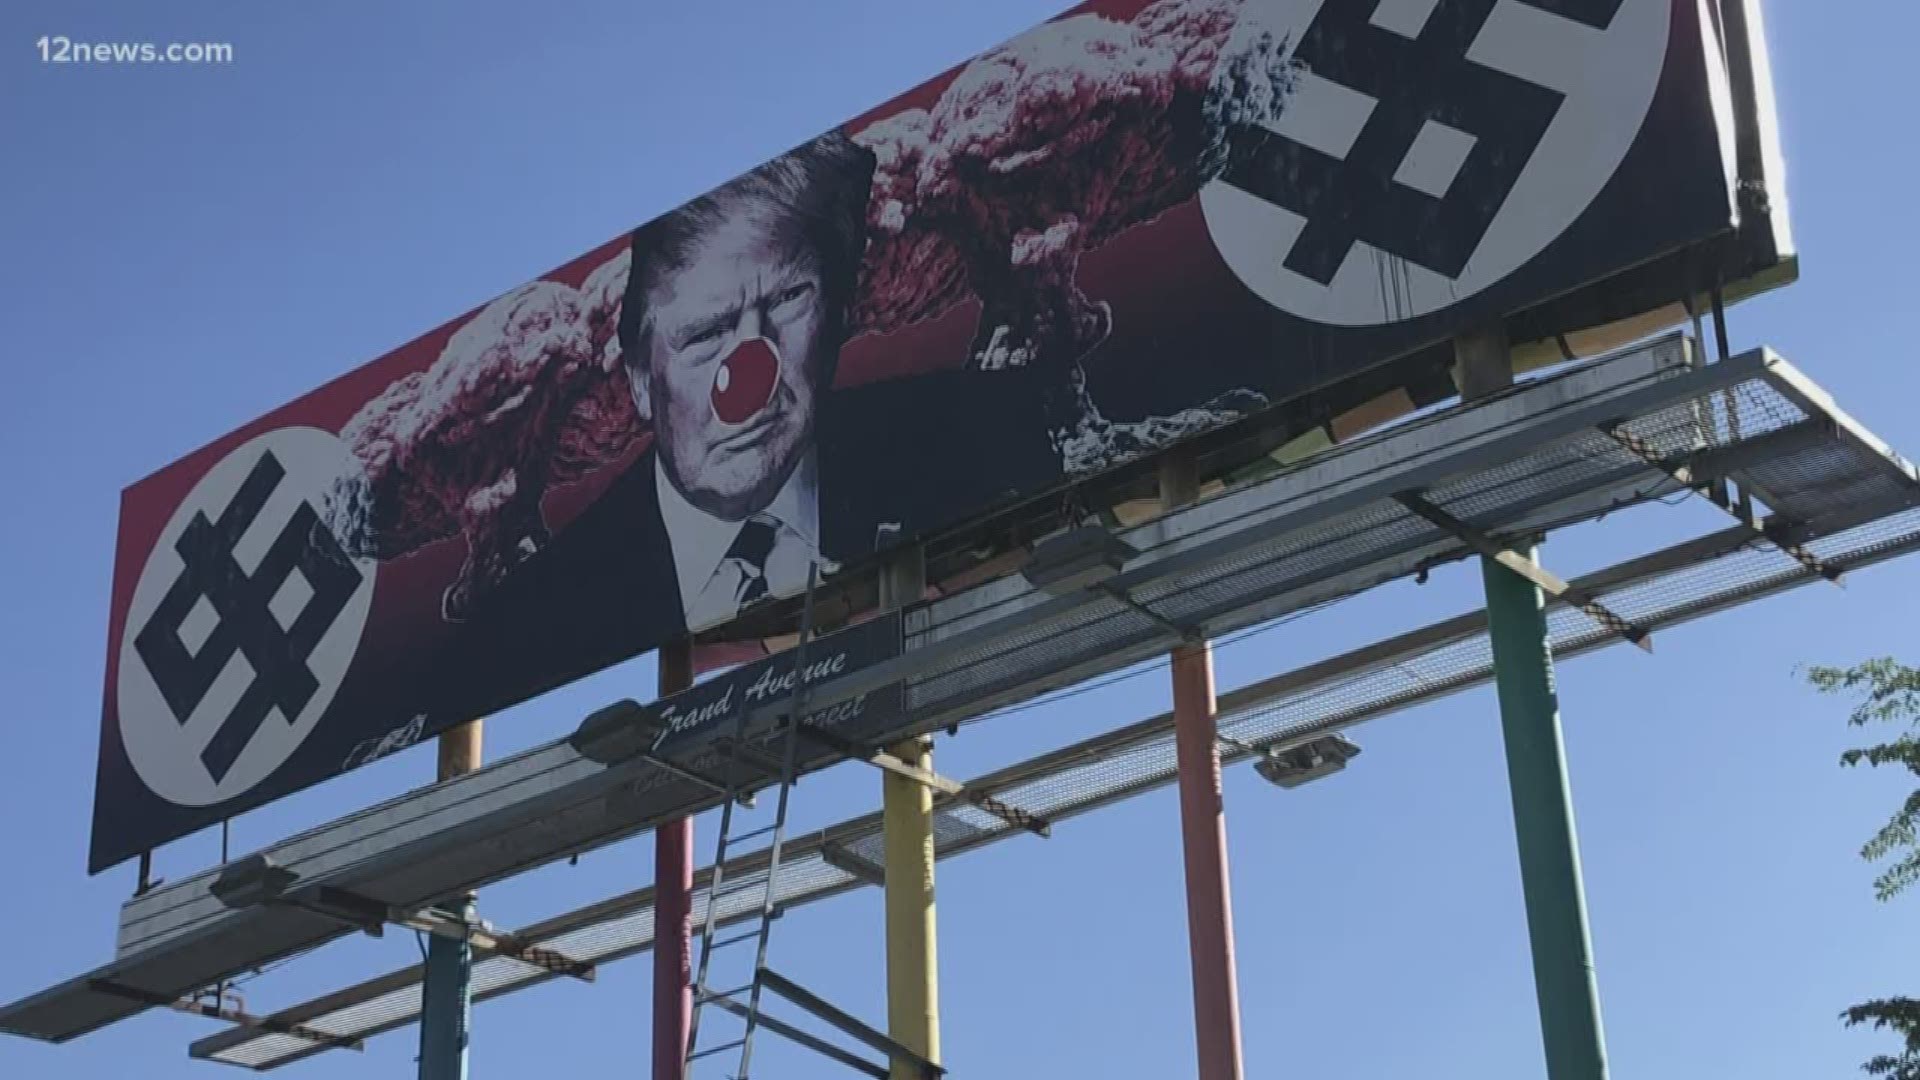 An already controversial billboard featuring President Donald Trump is at the topic of conversation again. Someone has put a clown nose onto Trump's face.